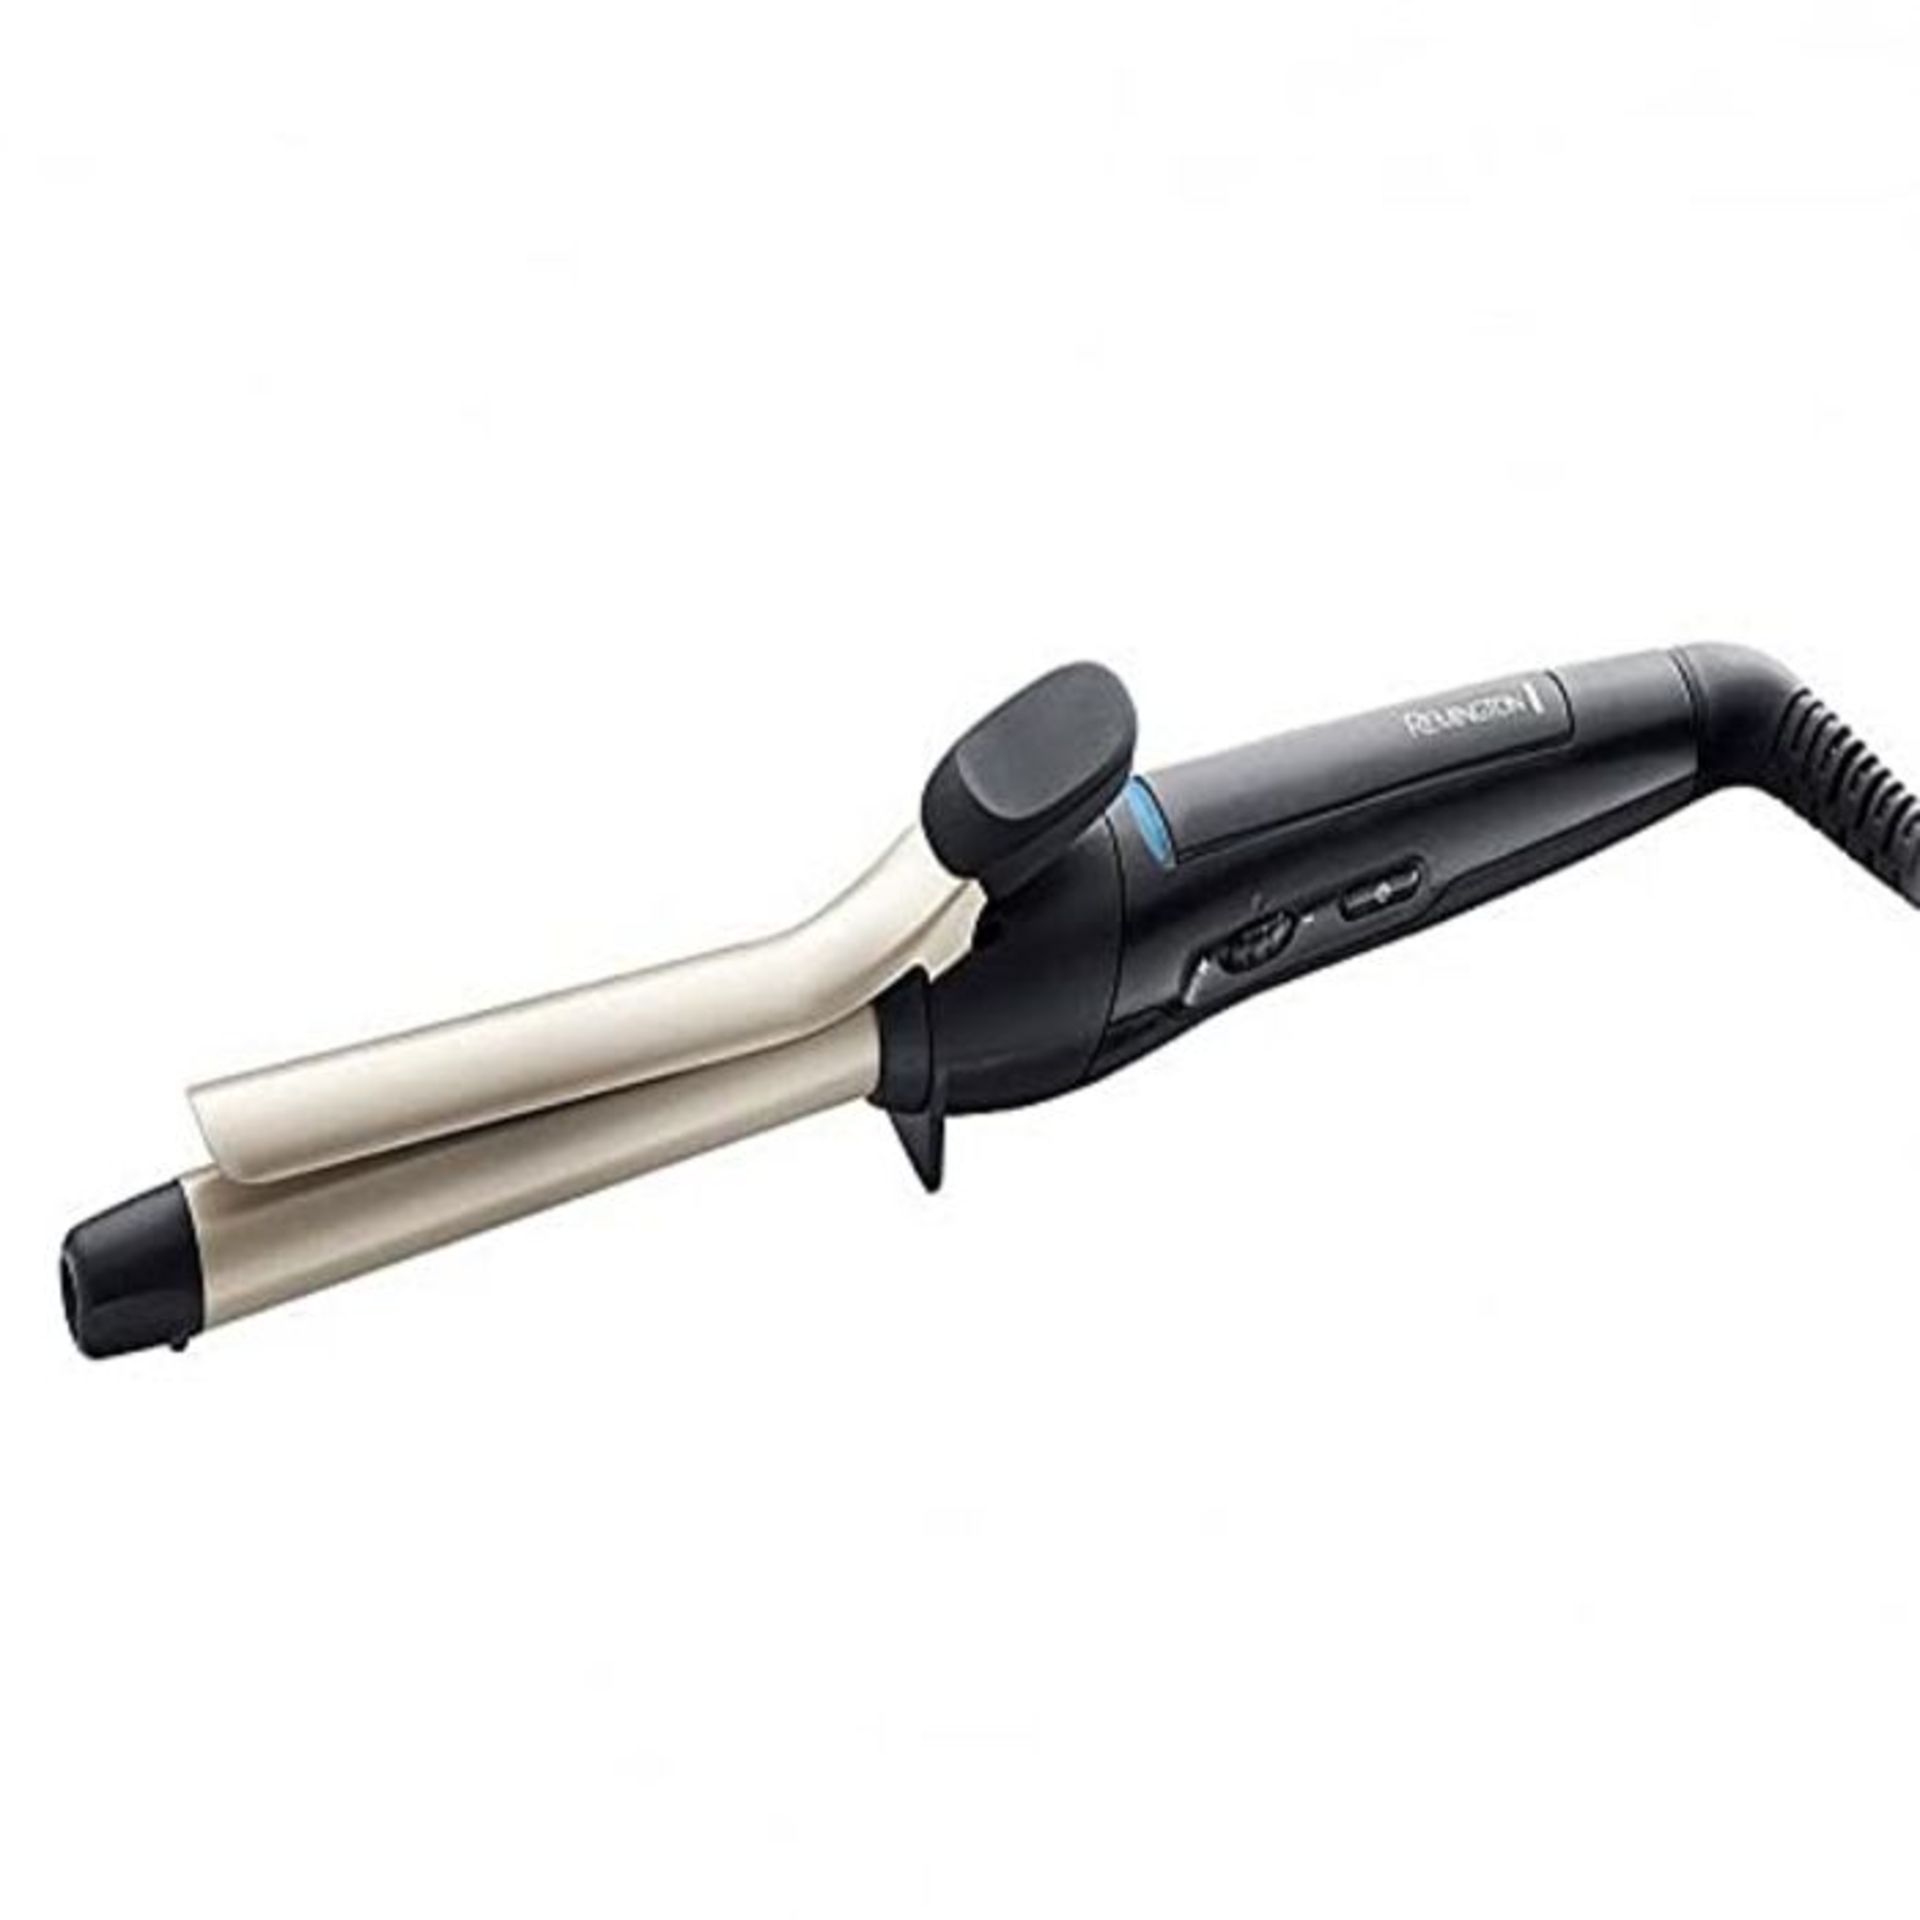 Remington Ceramic Curling Iron From Pro Spiral Curl CI 5319